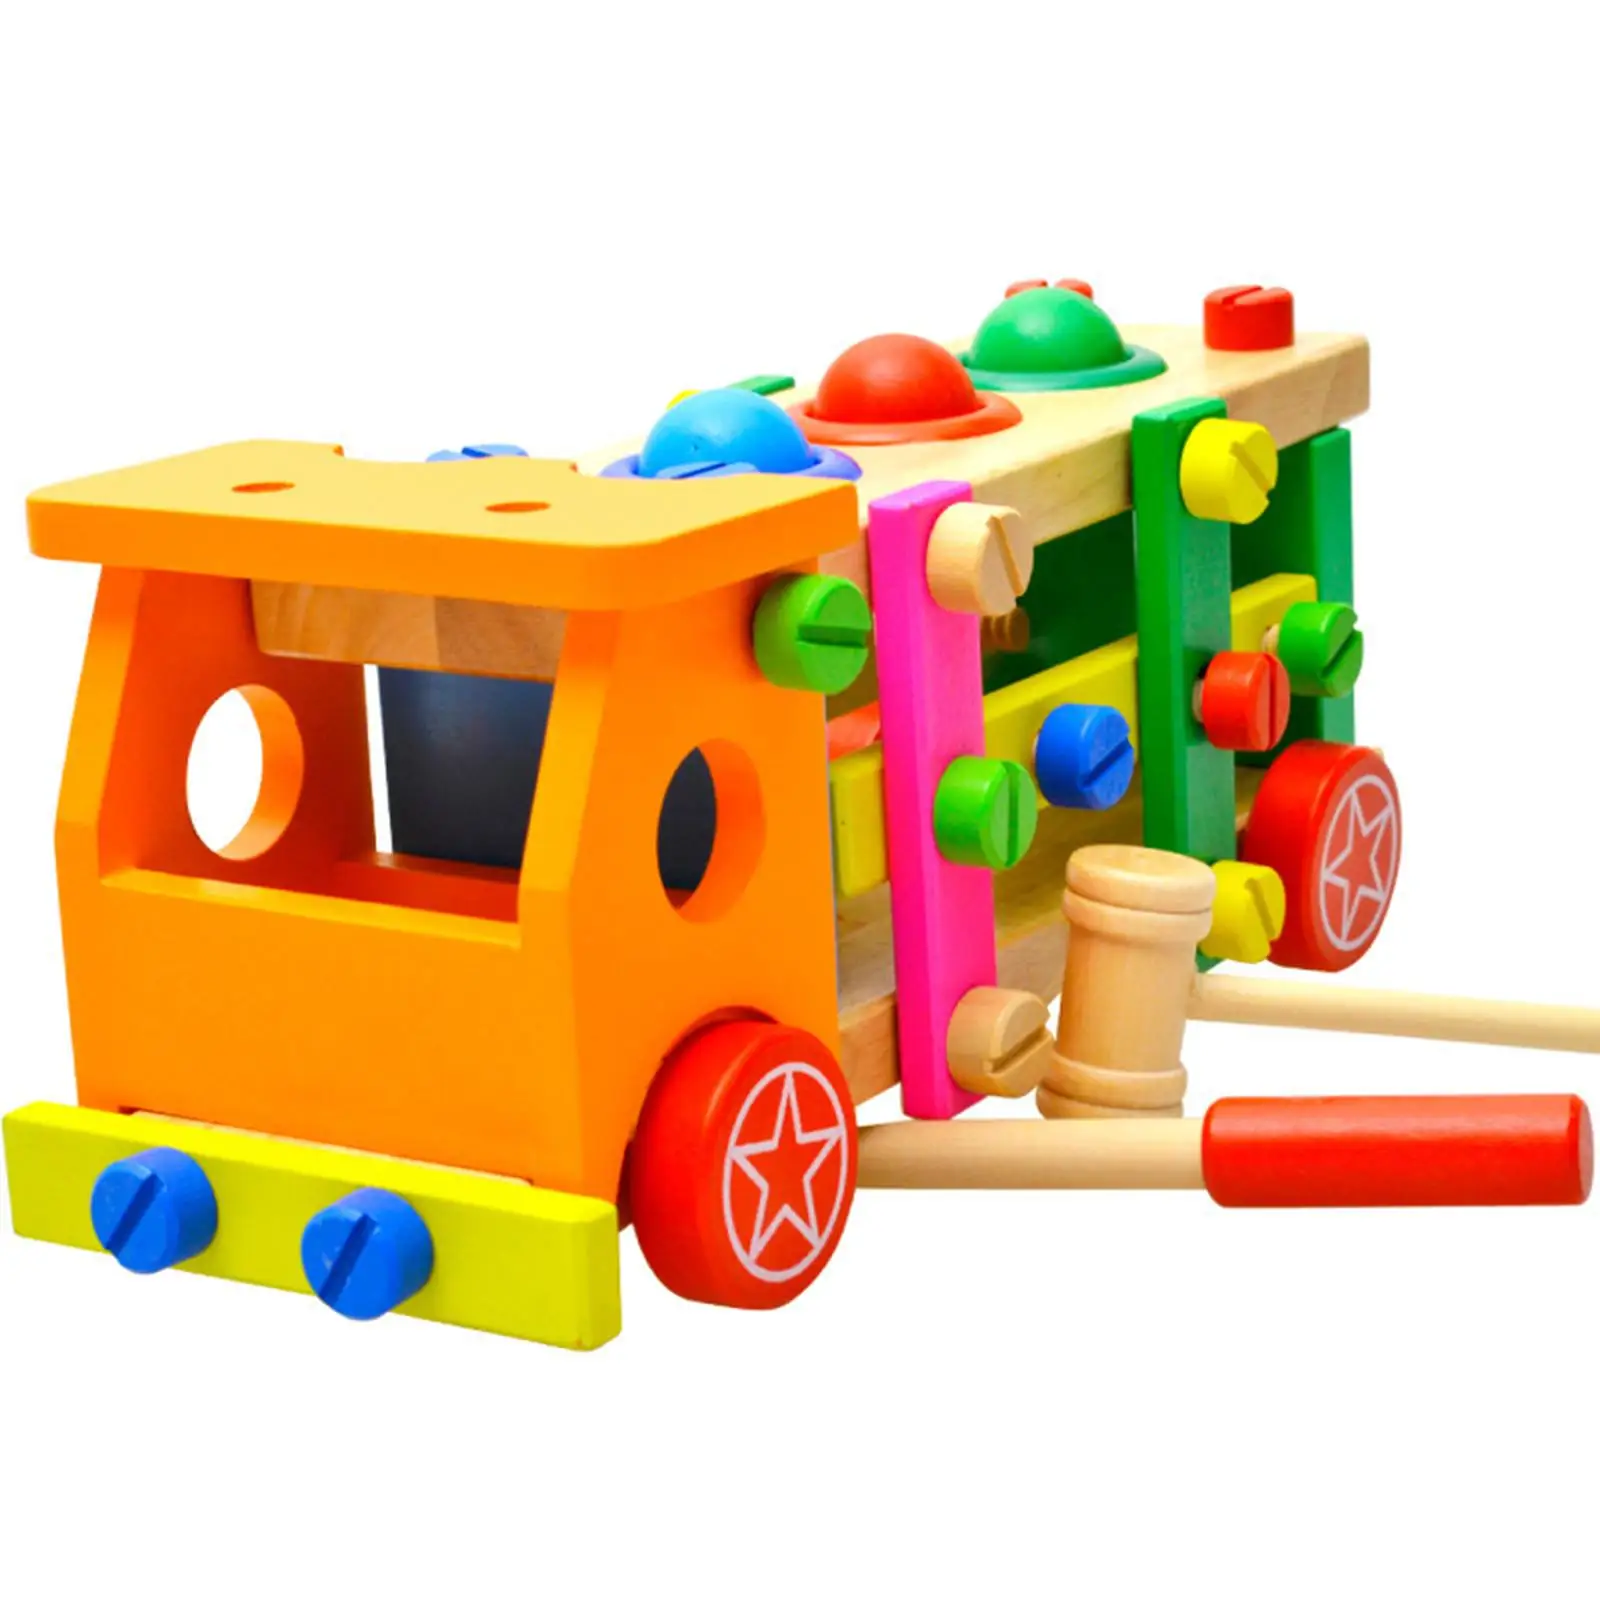 

Wooden Tool Bench Set Development Toy Fine Motor Skill Pounding Toy Assembly Engineering Truck Toy Pretend Play for Children